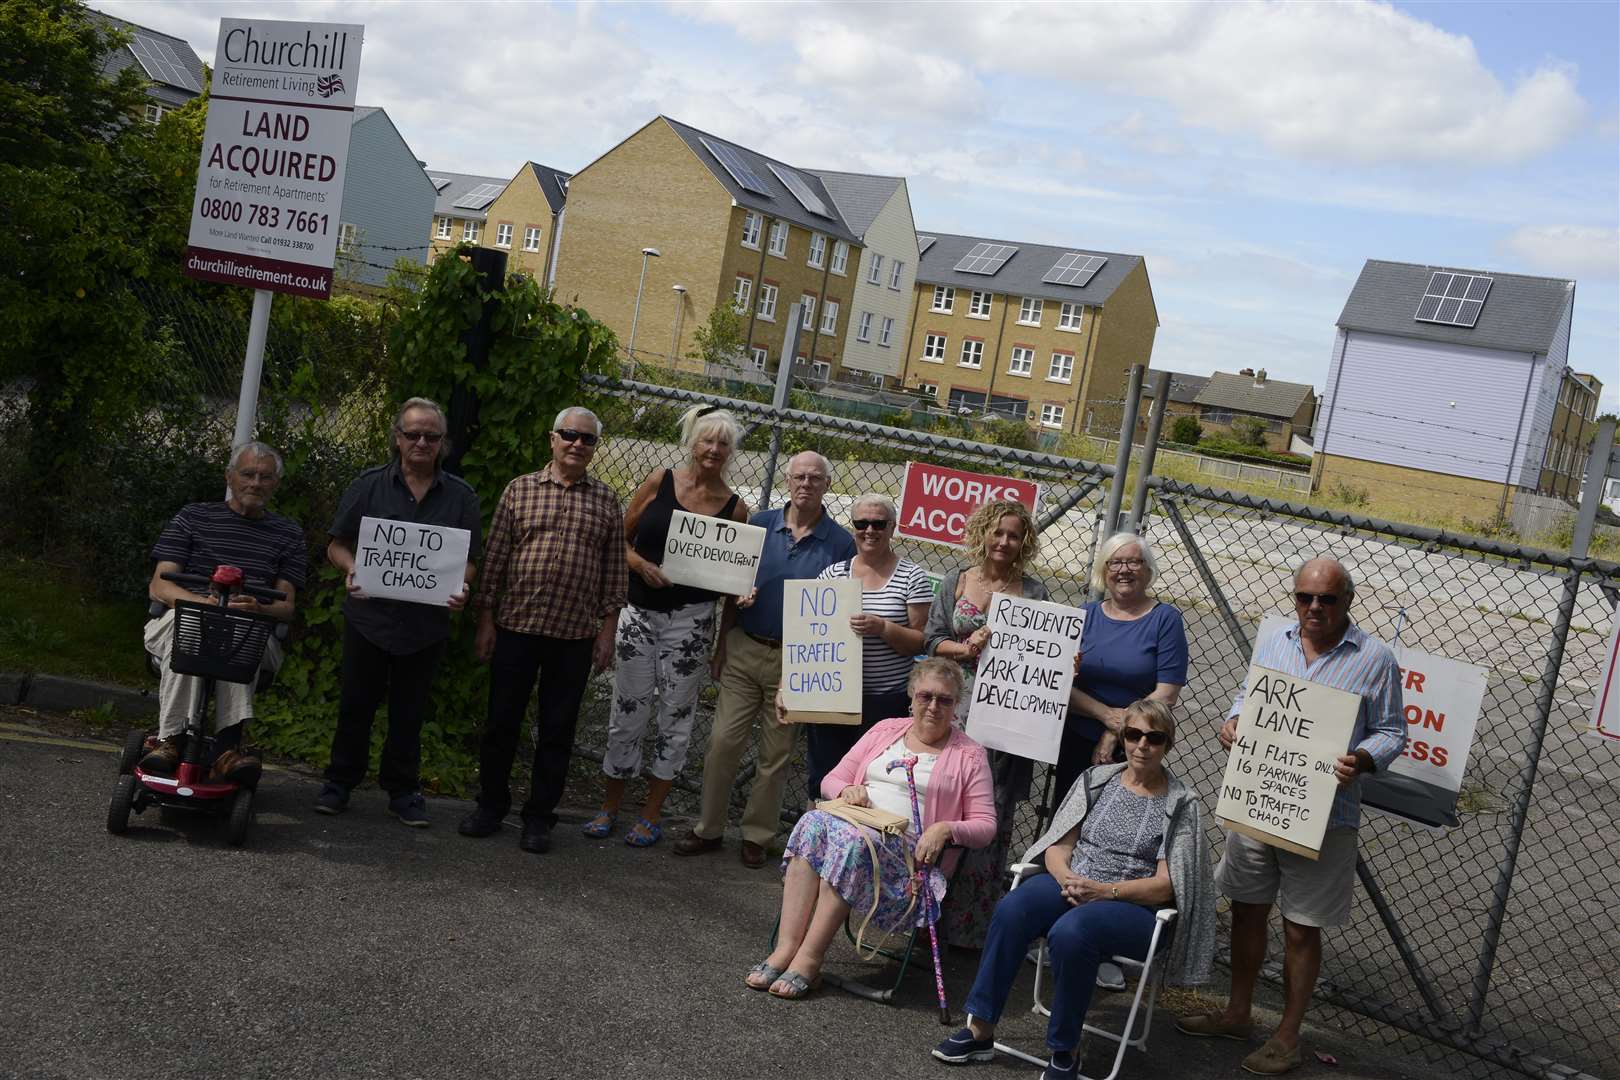 Residents protesting outside the proposed Churchill Retirement Living complex